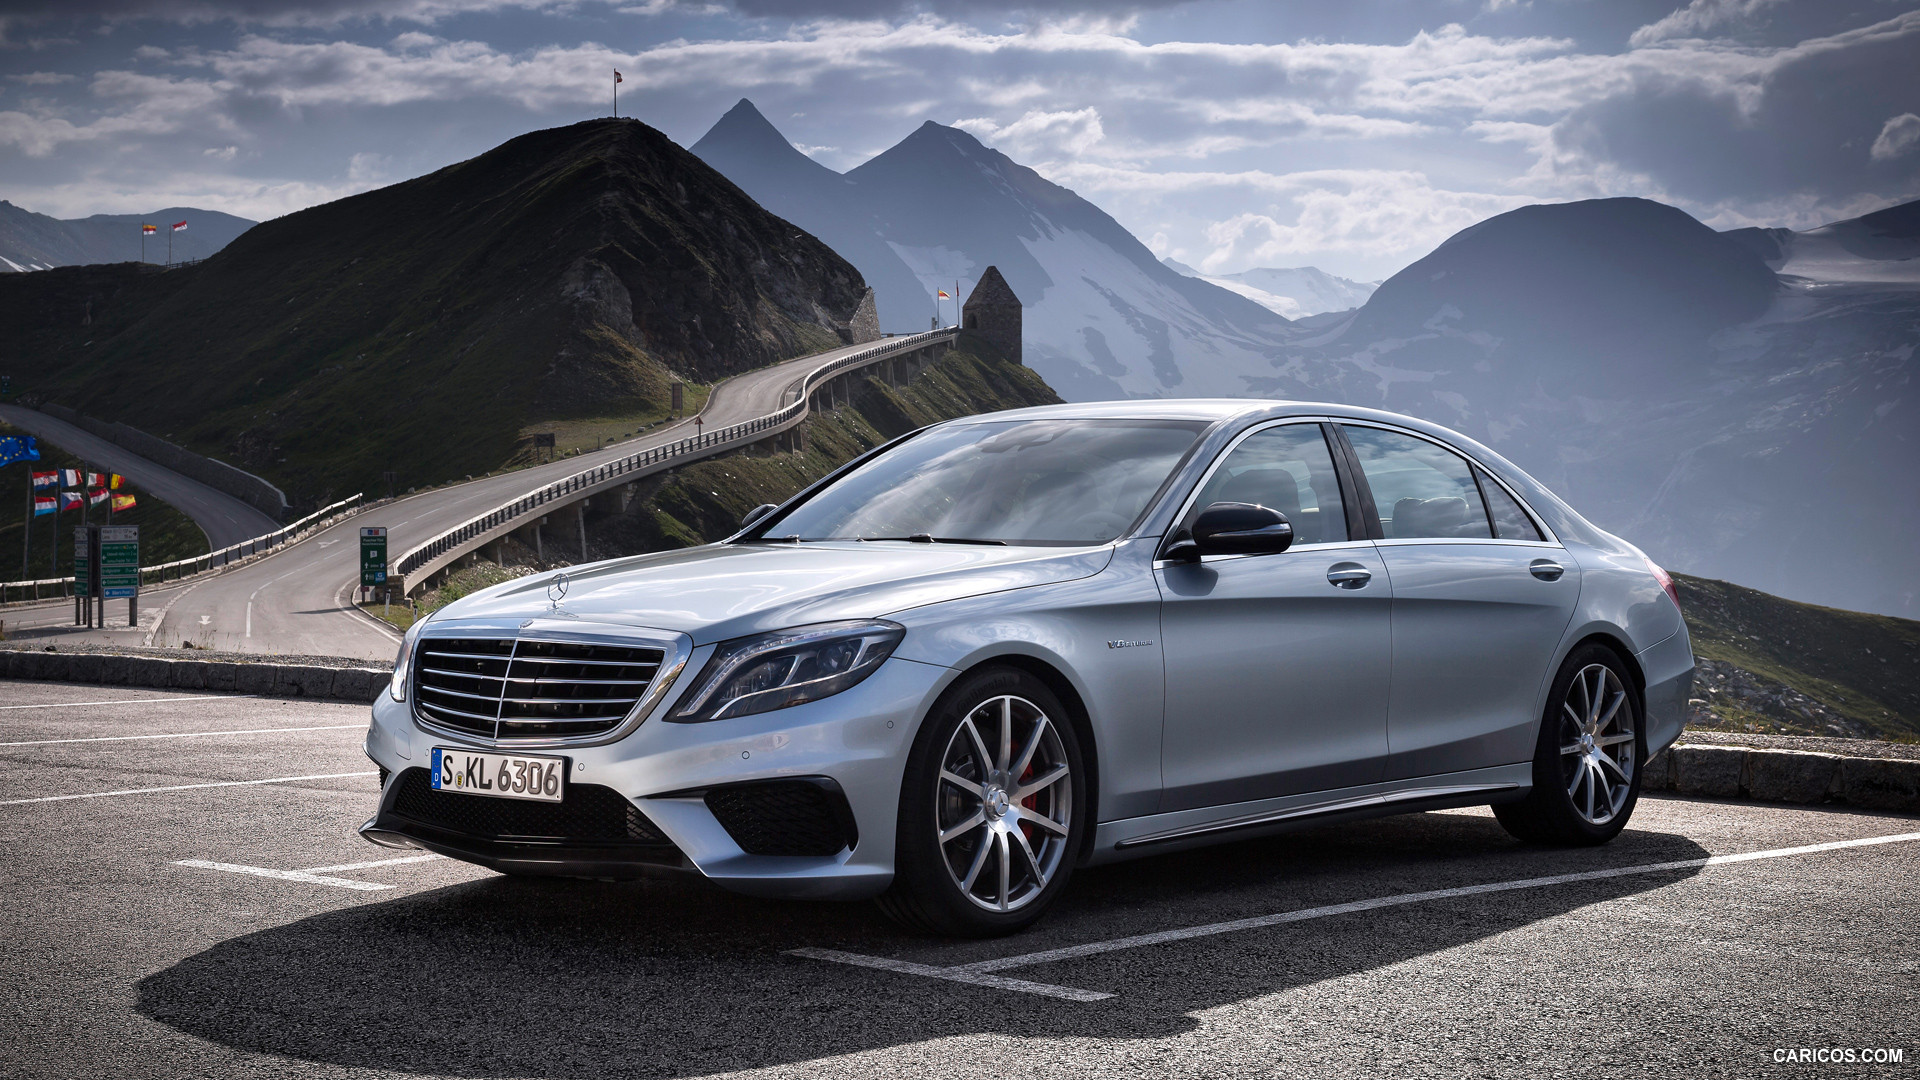 Mercedes-Benz S63 AMG W222 (2014)  - Front, #15 of 102